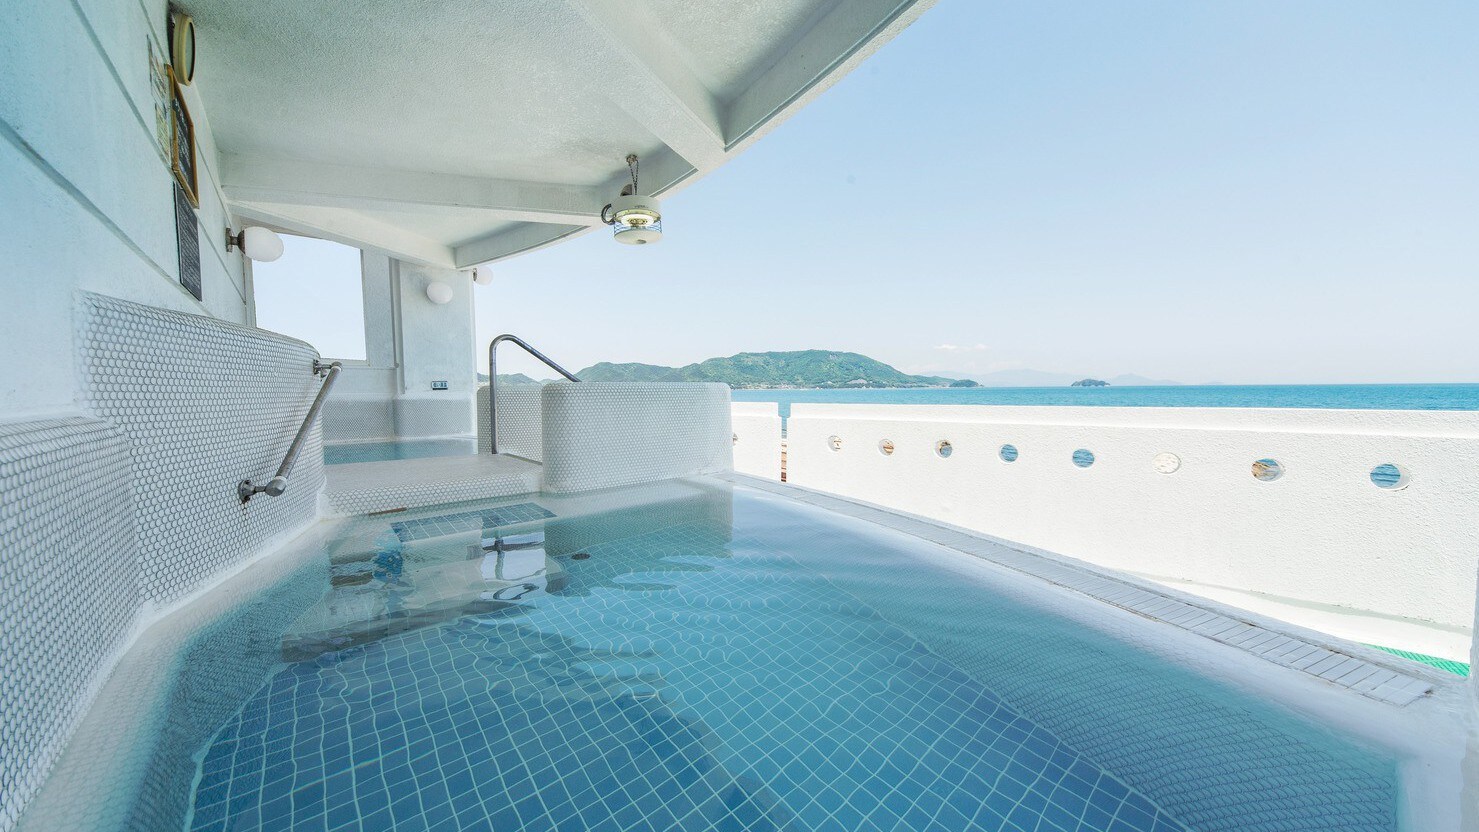 ■ Qua Thalasso's proud seawater open-air bath. There are plenty of minerals in seawater!